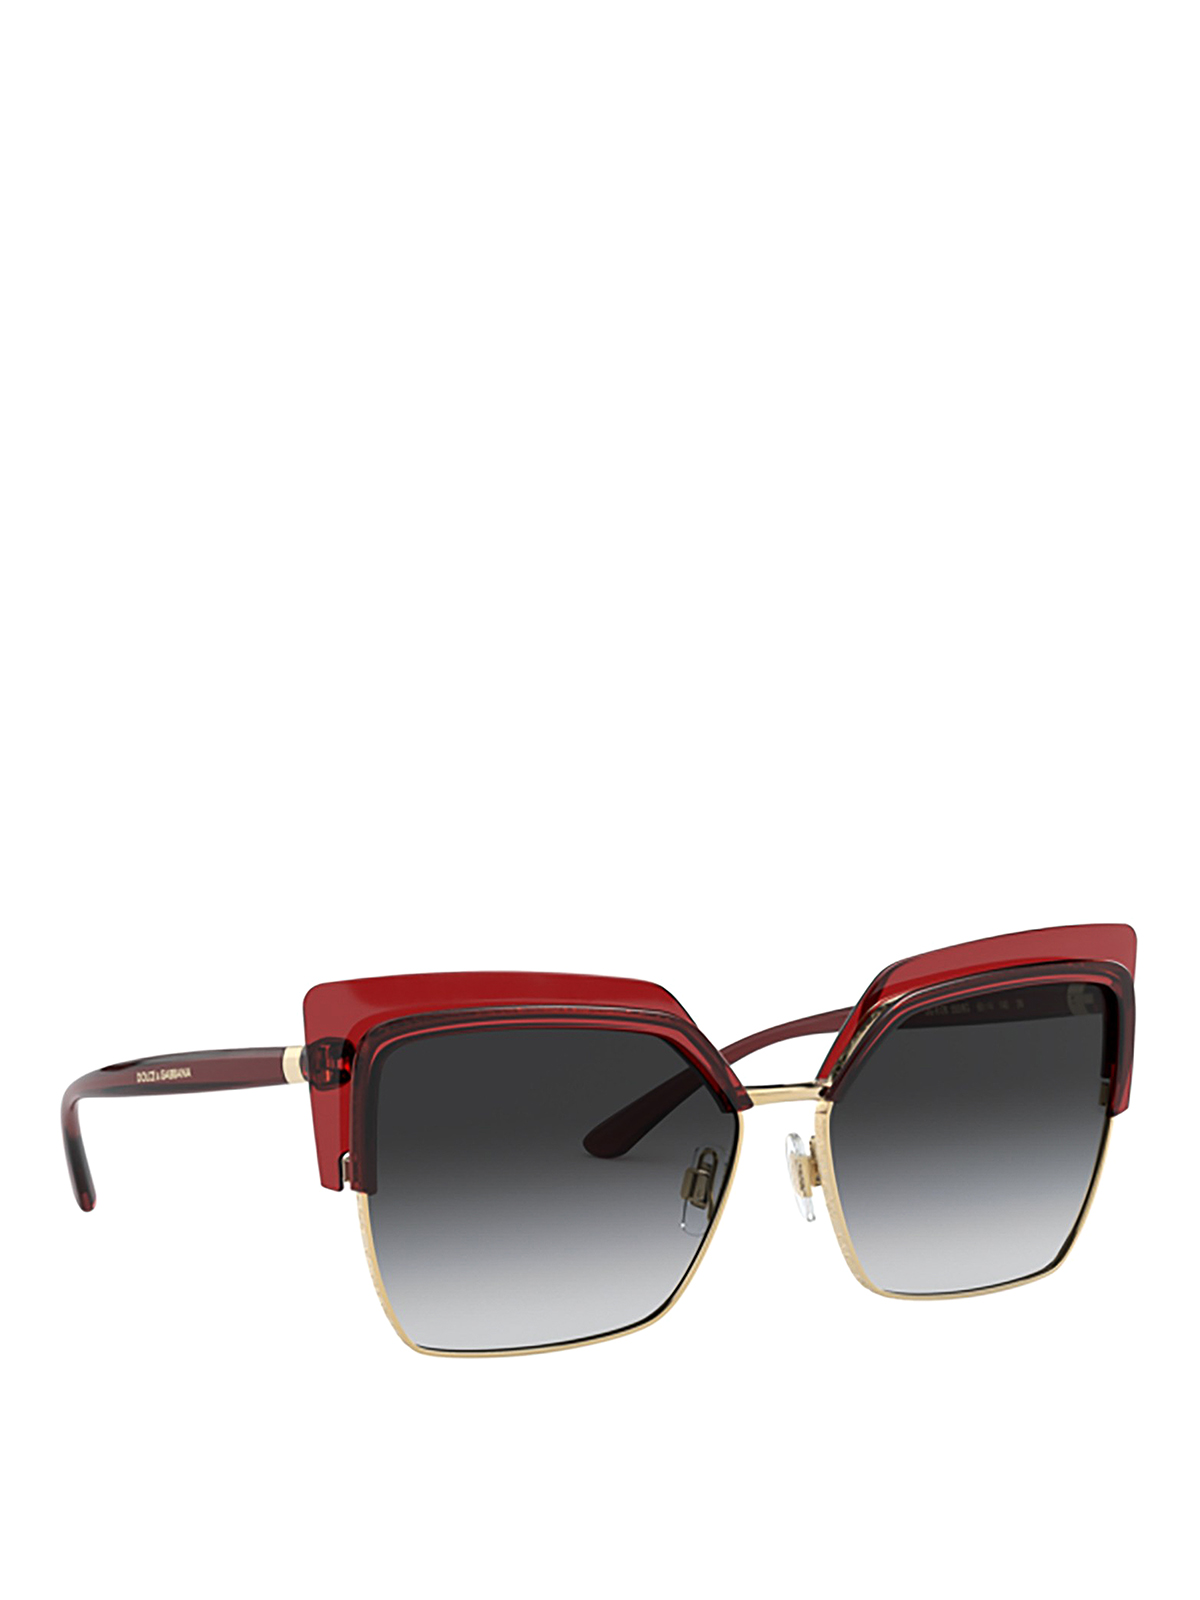 DOLCE & GABBANA DOUBLE LINE RED SQUARED SUNGLASSES